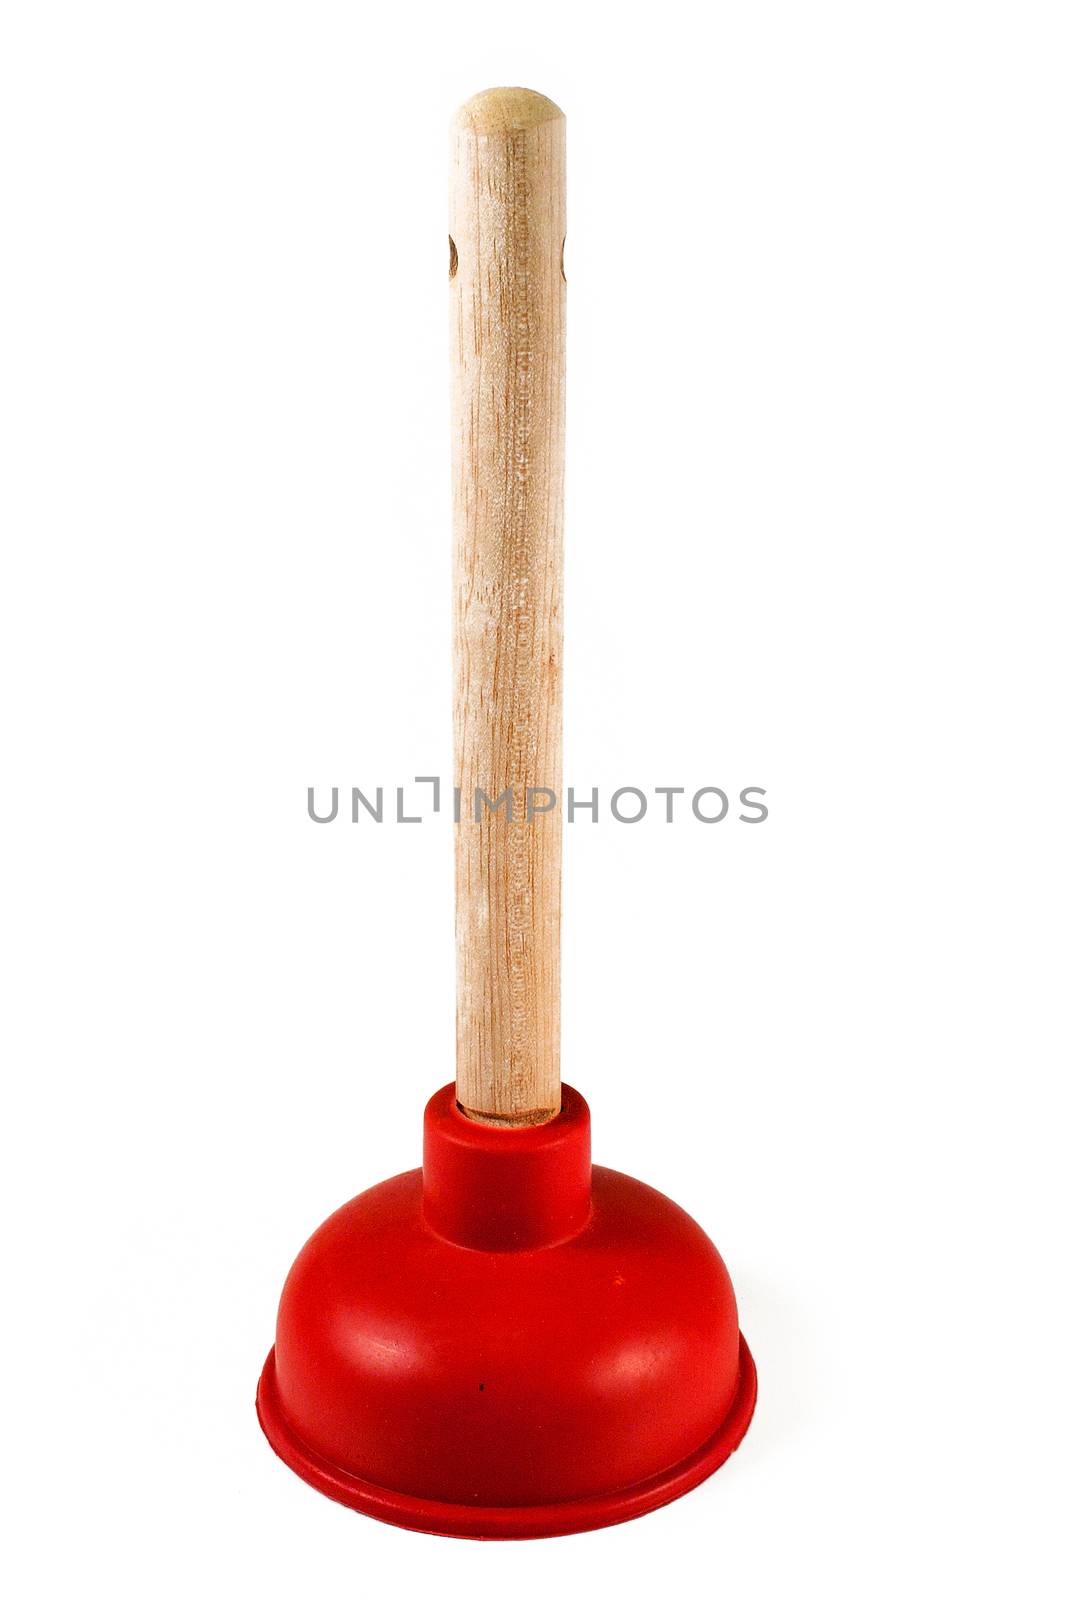 Red Plunger to unclog toilets